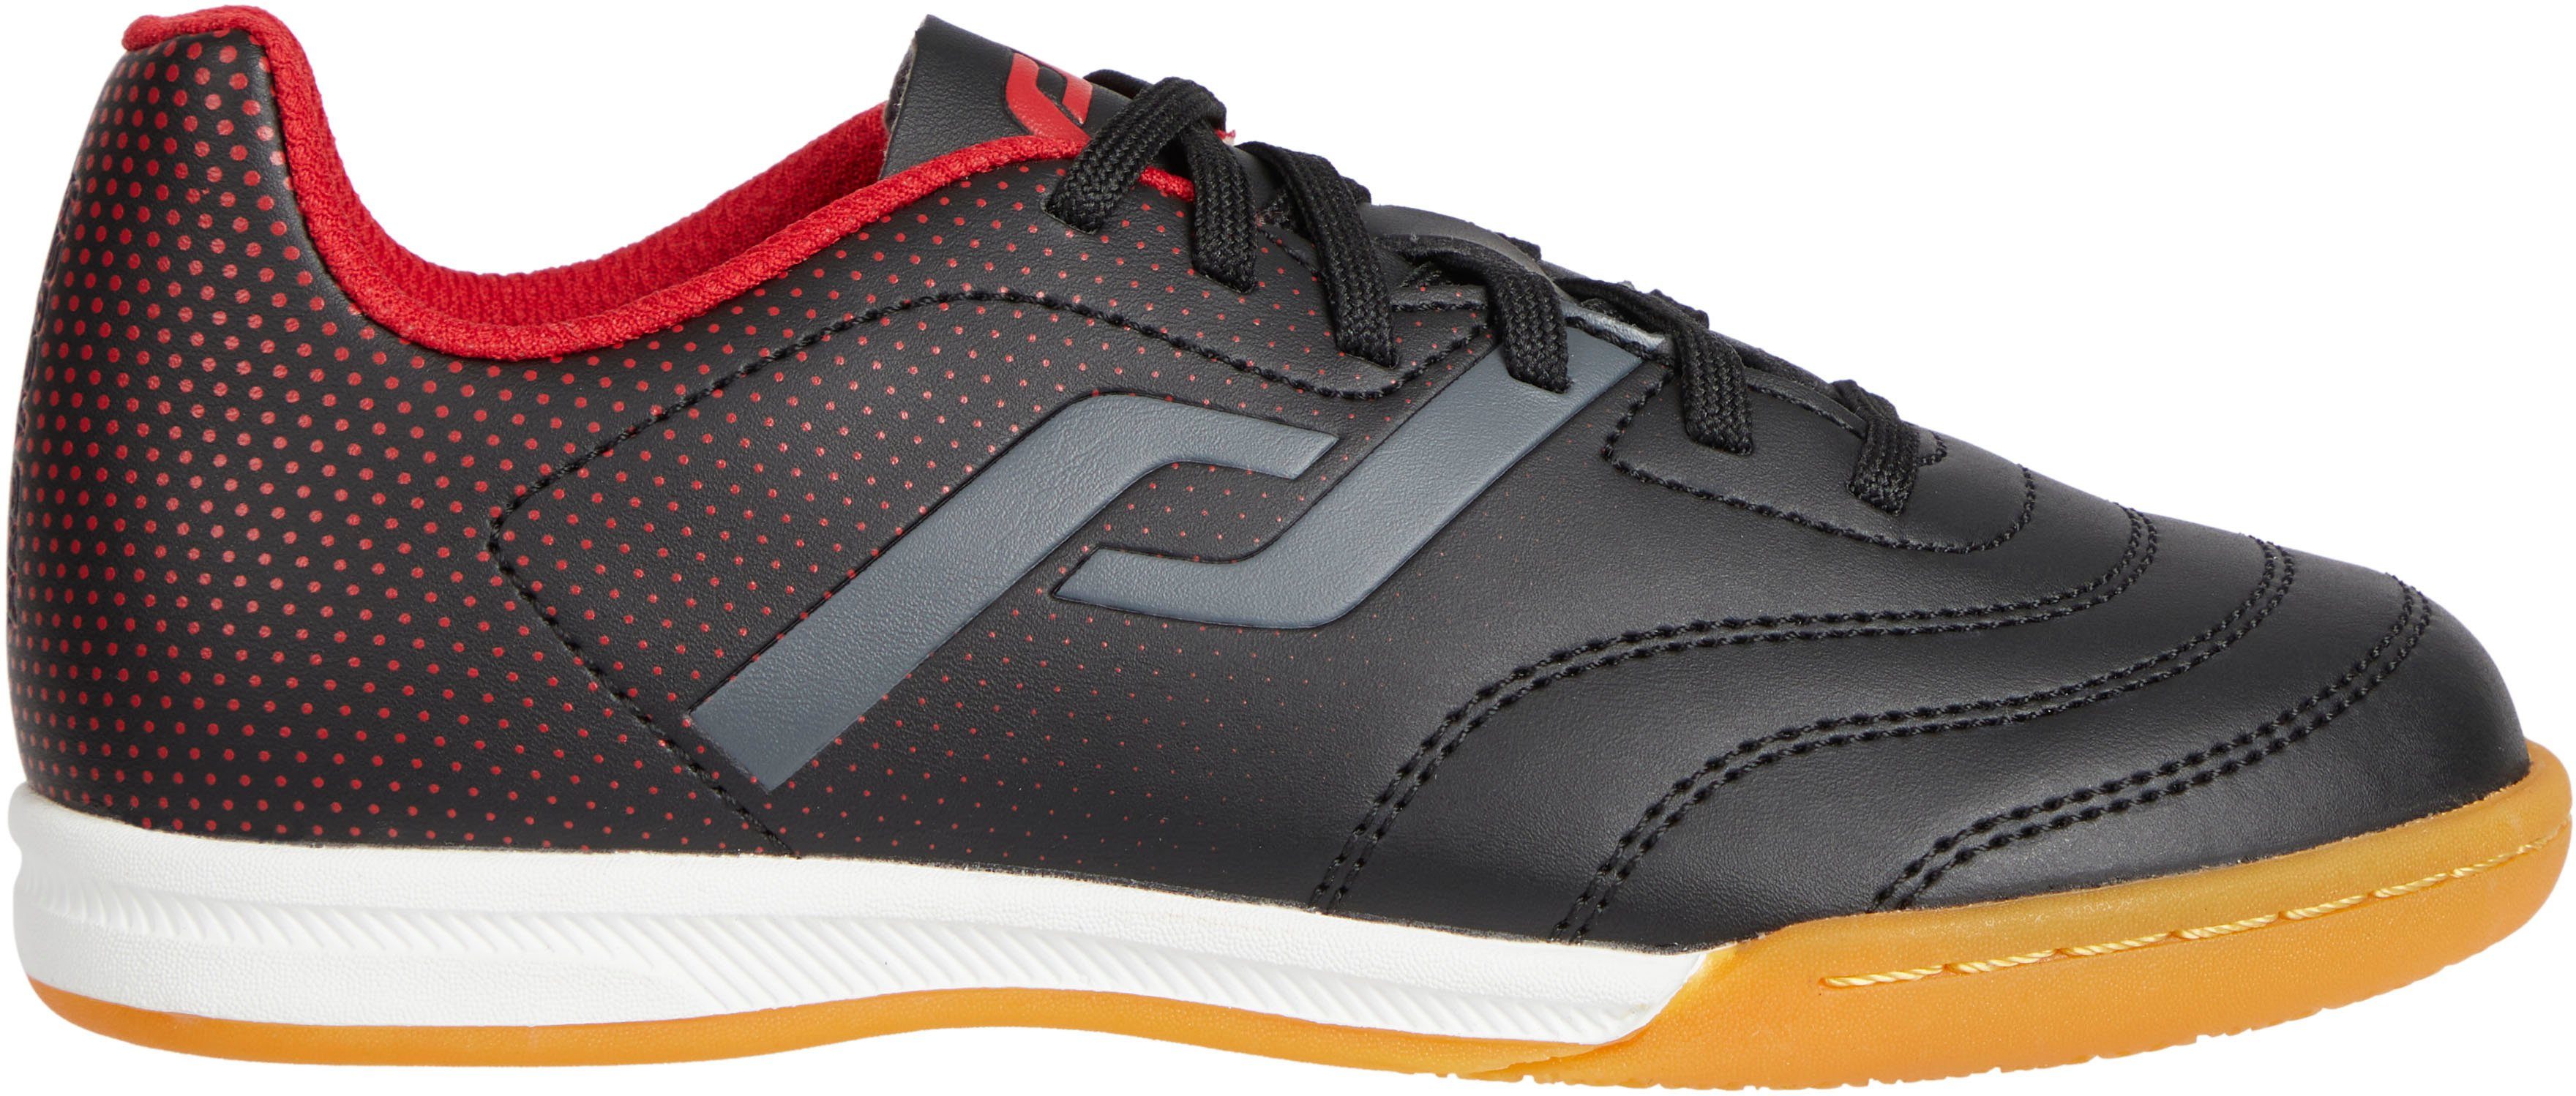 Pro Touch Ind Classic III IN JR Fußballschuh BLACK/RED/ANTHRACITE | 